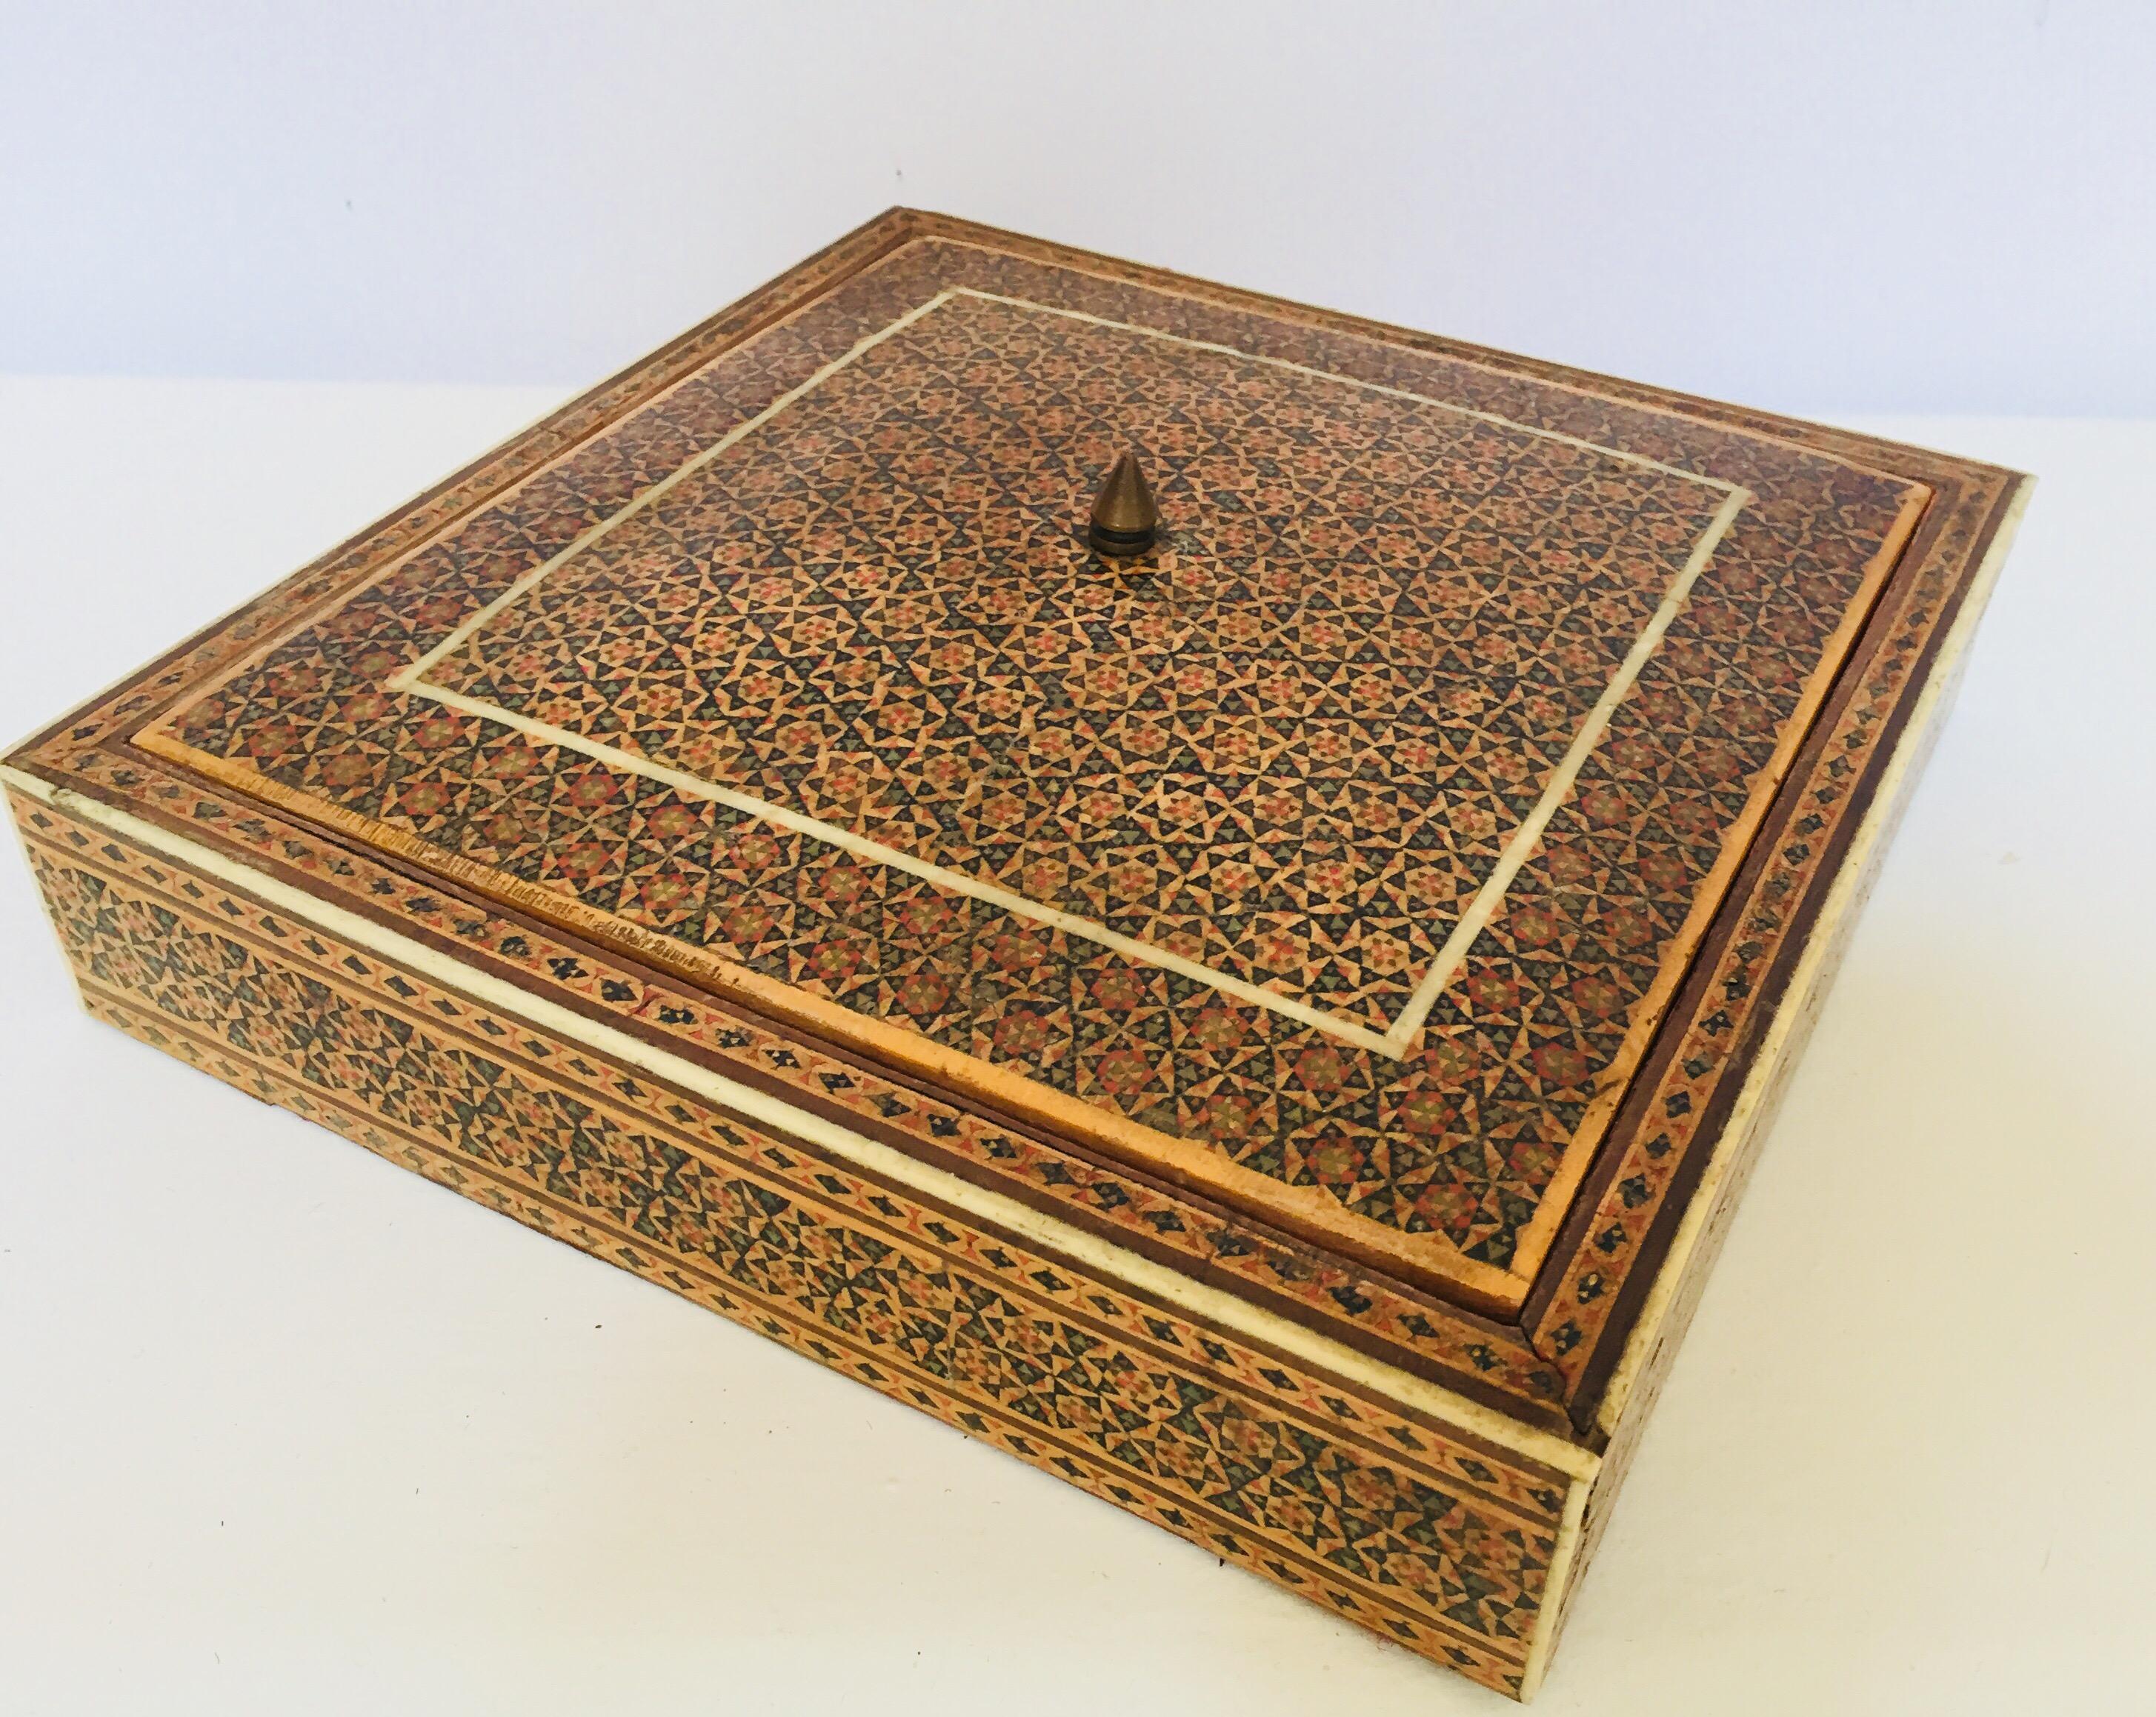 Persian micro mosaic inlaid jewelry box with lid.
Intricate inlaid middle Eastern Persian box with floral and geometric Islamic Moorish design in a rectangular form.
Moorish design bone inlay and marquetry, very fine artwork, lined in red